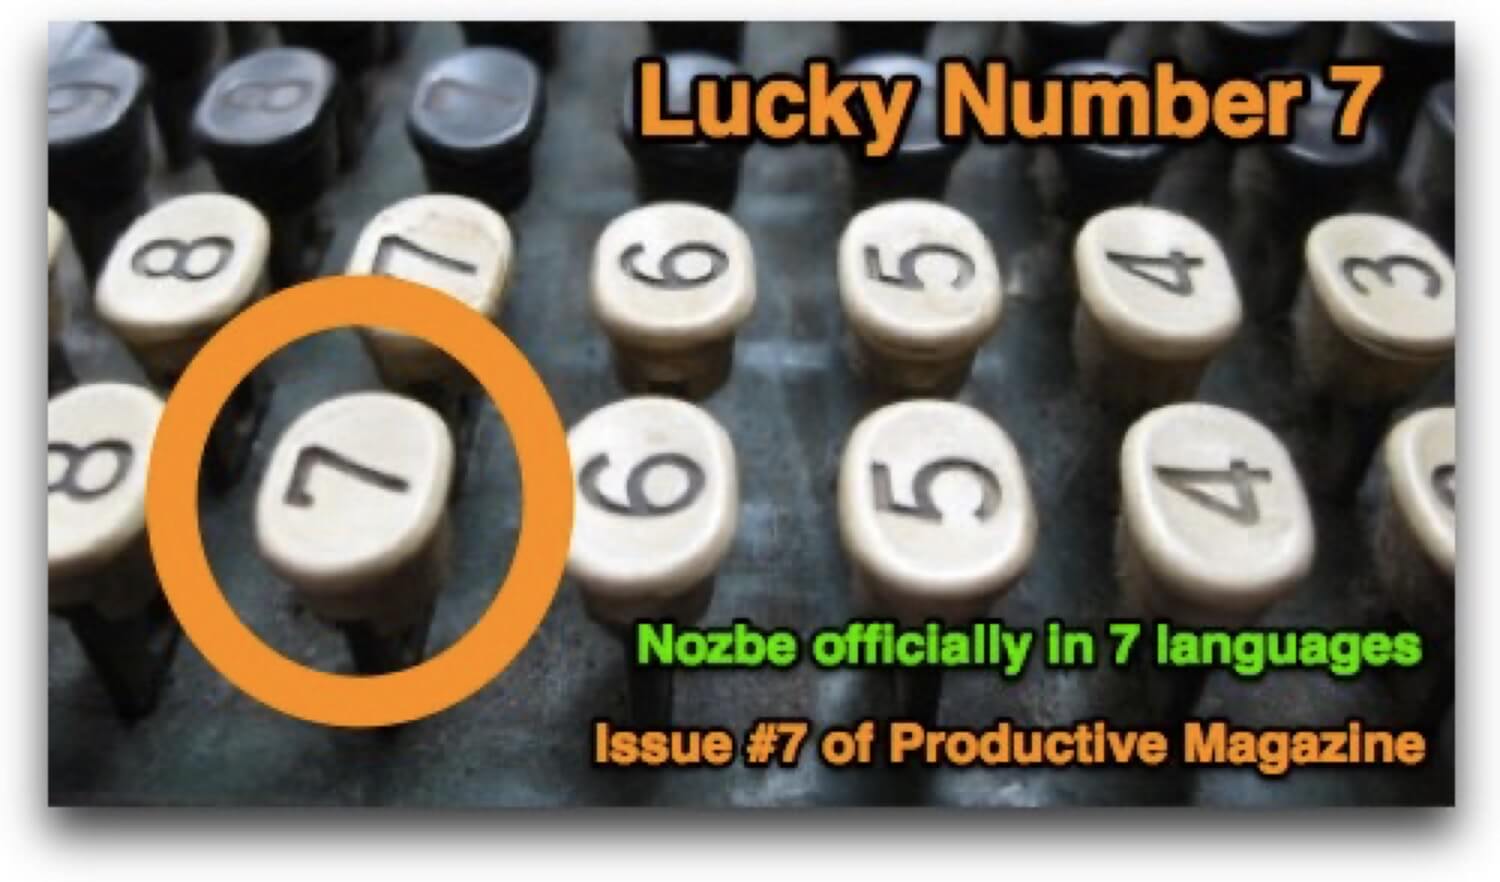 Lucky number 7 for Magazine and Nozbe